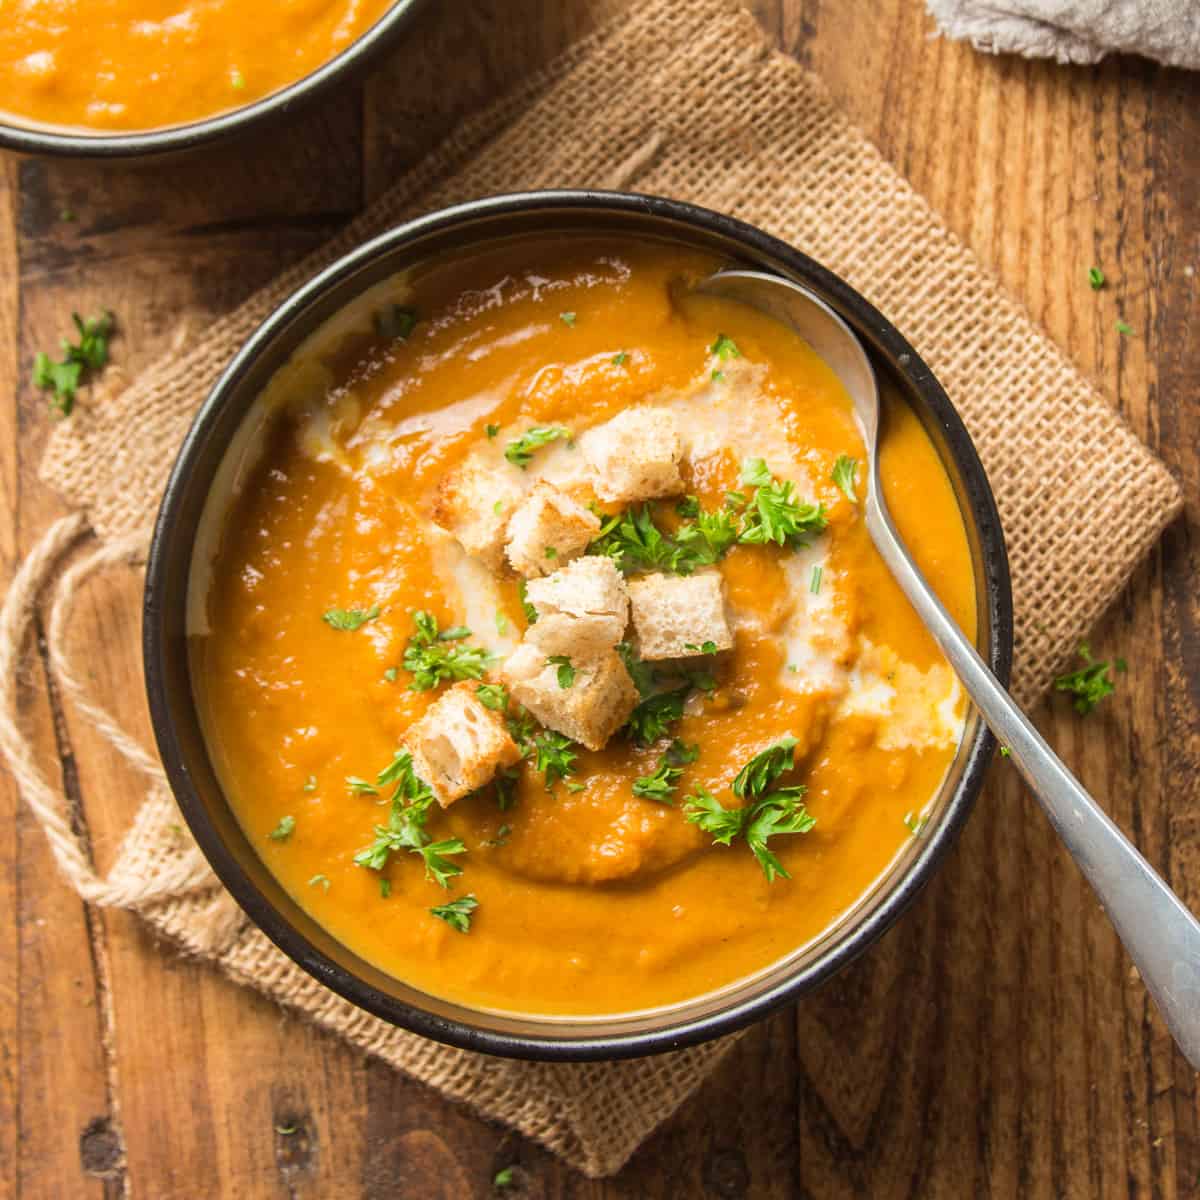 Bowl of Vegan Pumpkin Soup Topped with Parsley and Croutons